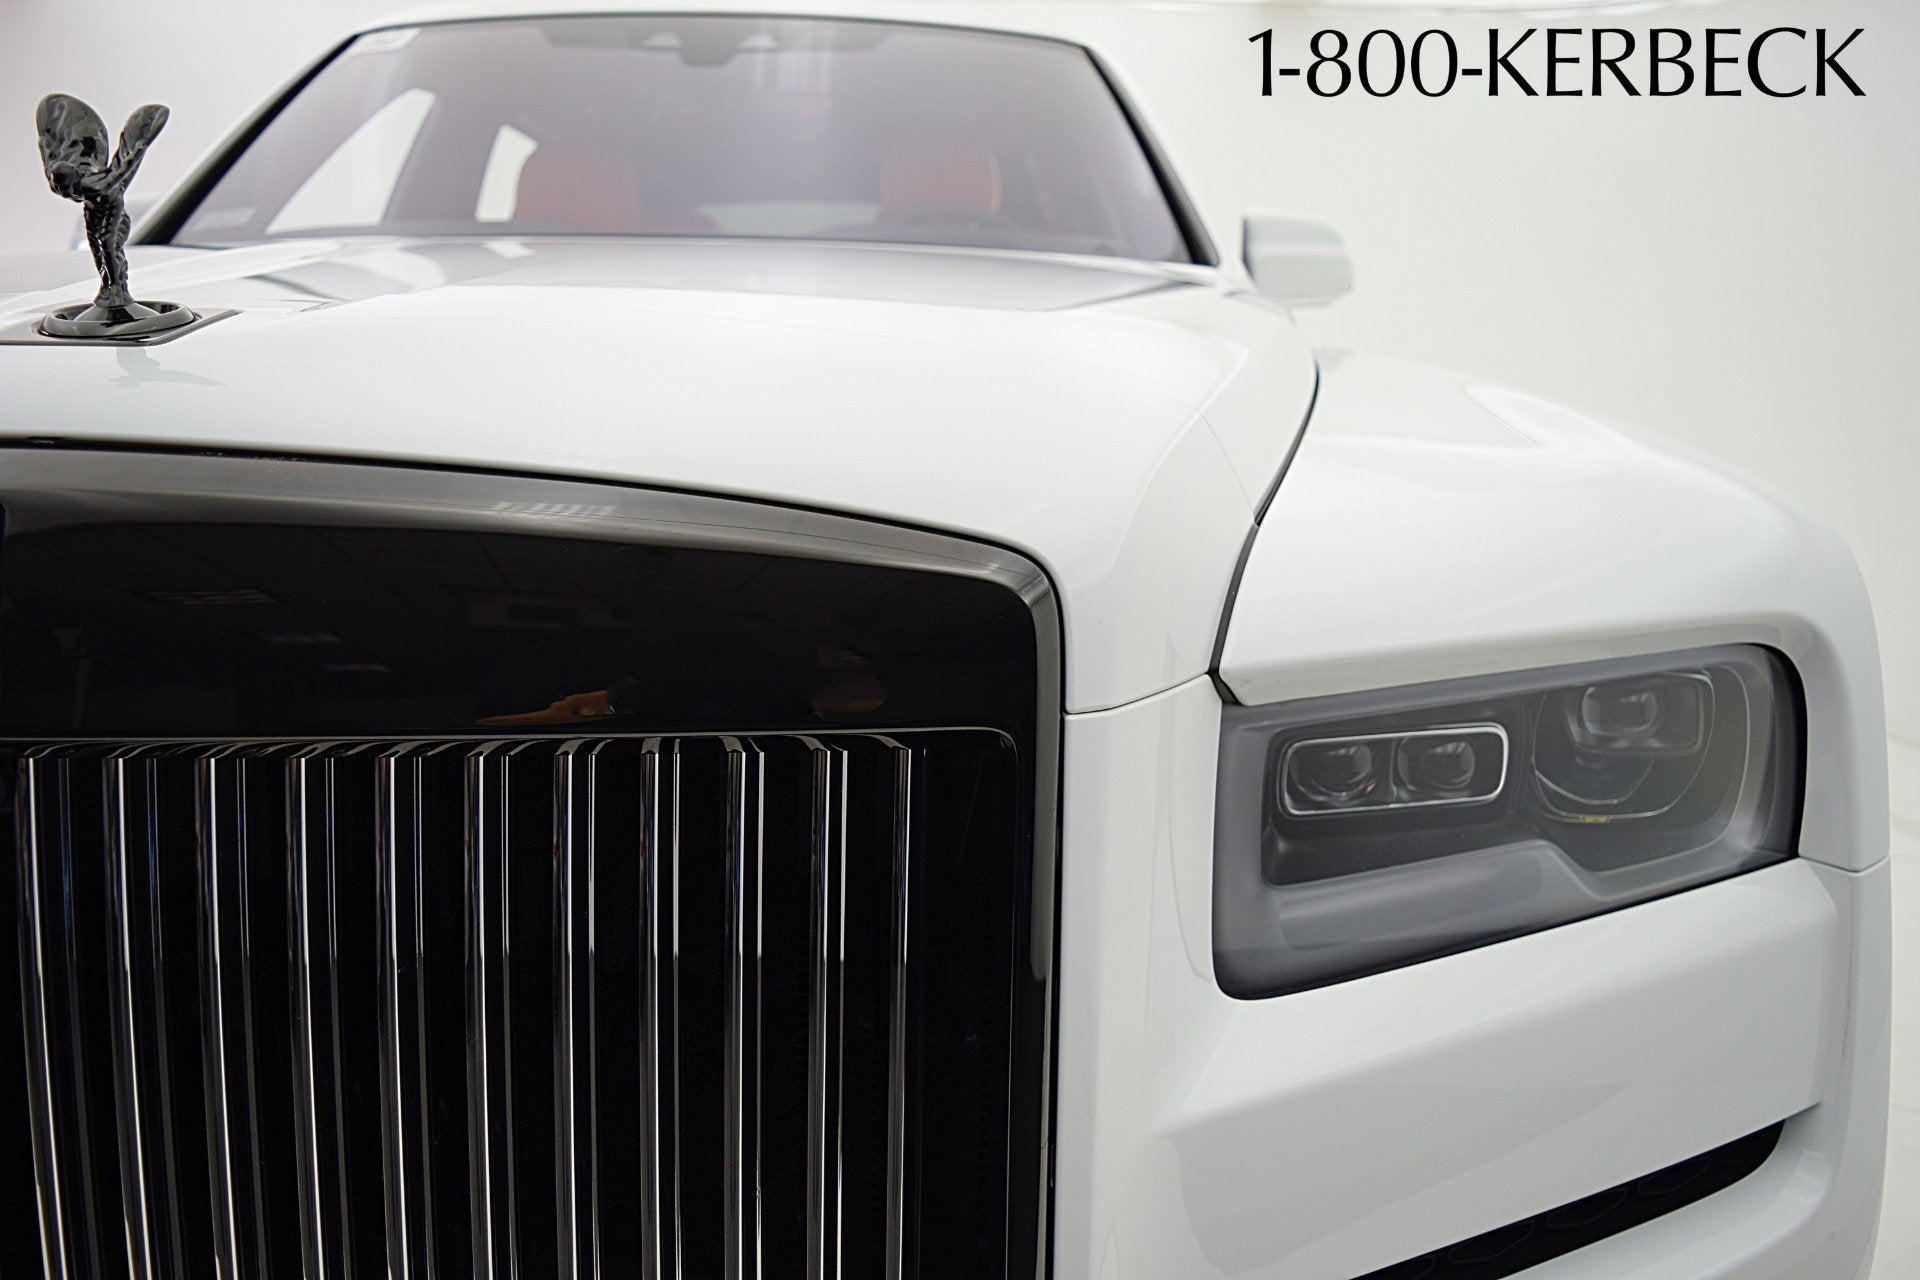 2023 Rolls-Royce Black Badge Cullinan / LEASE OPTIONS AVAILABLE